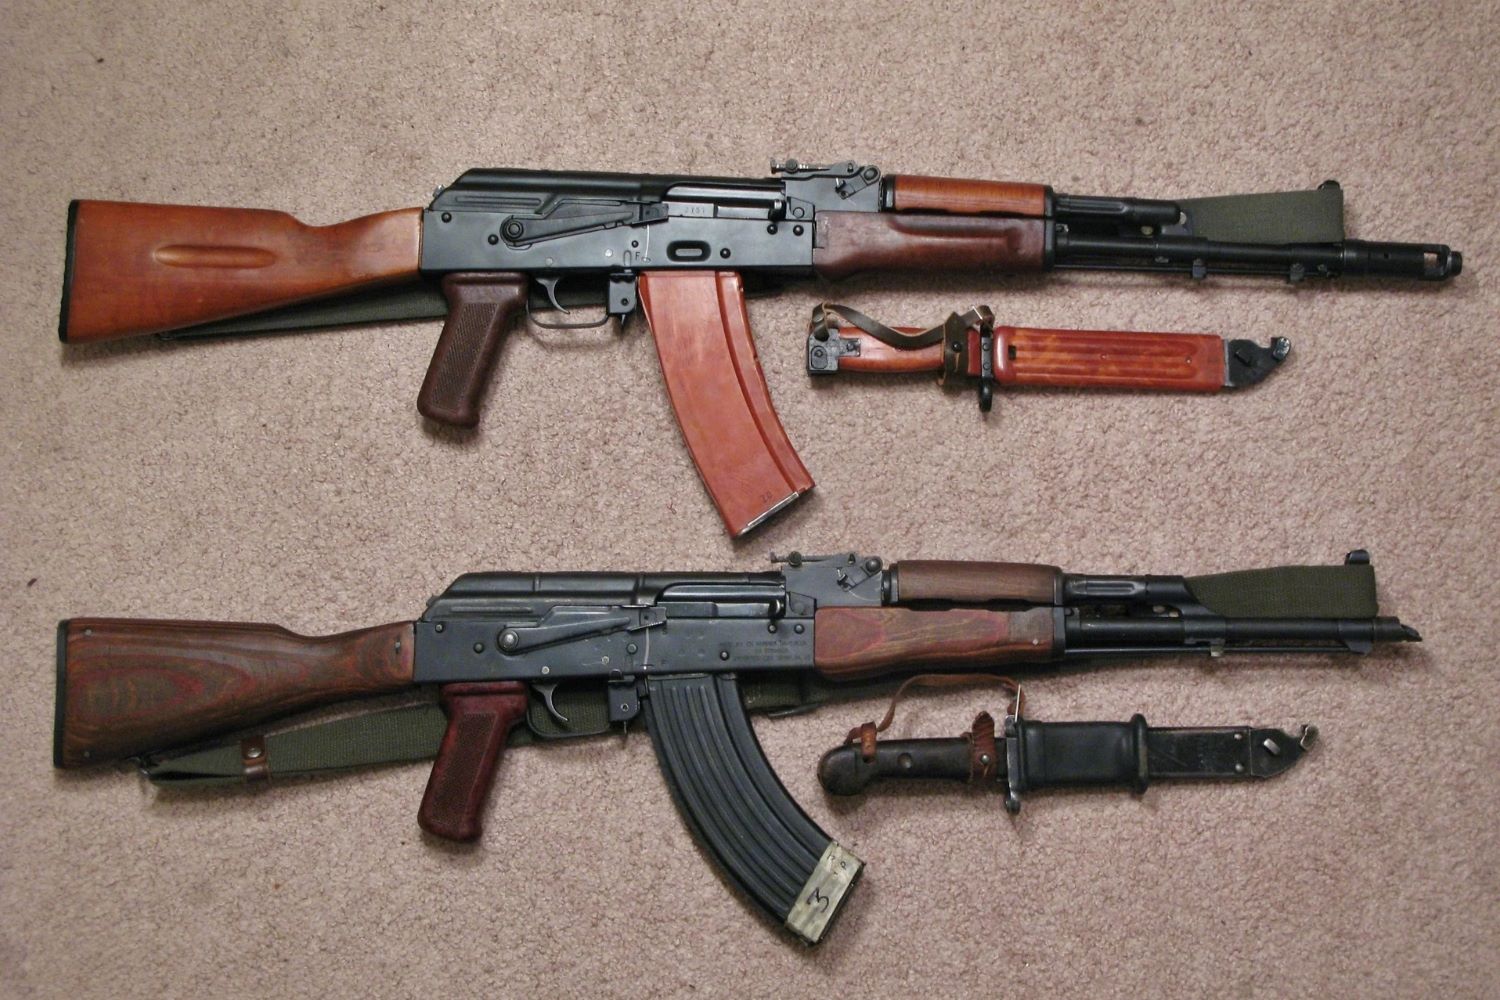 The Ultimate Guide To Distinguishing AK-47 From AK-74 - You Won't Believe The Key Differences!